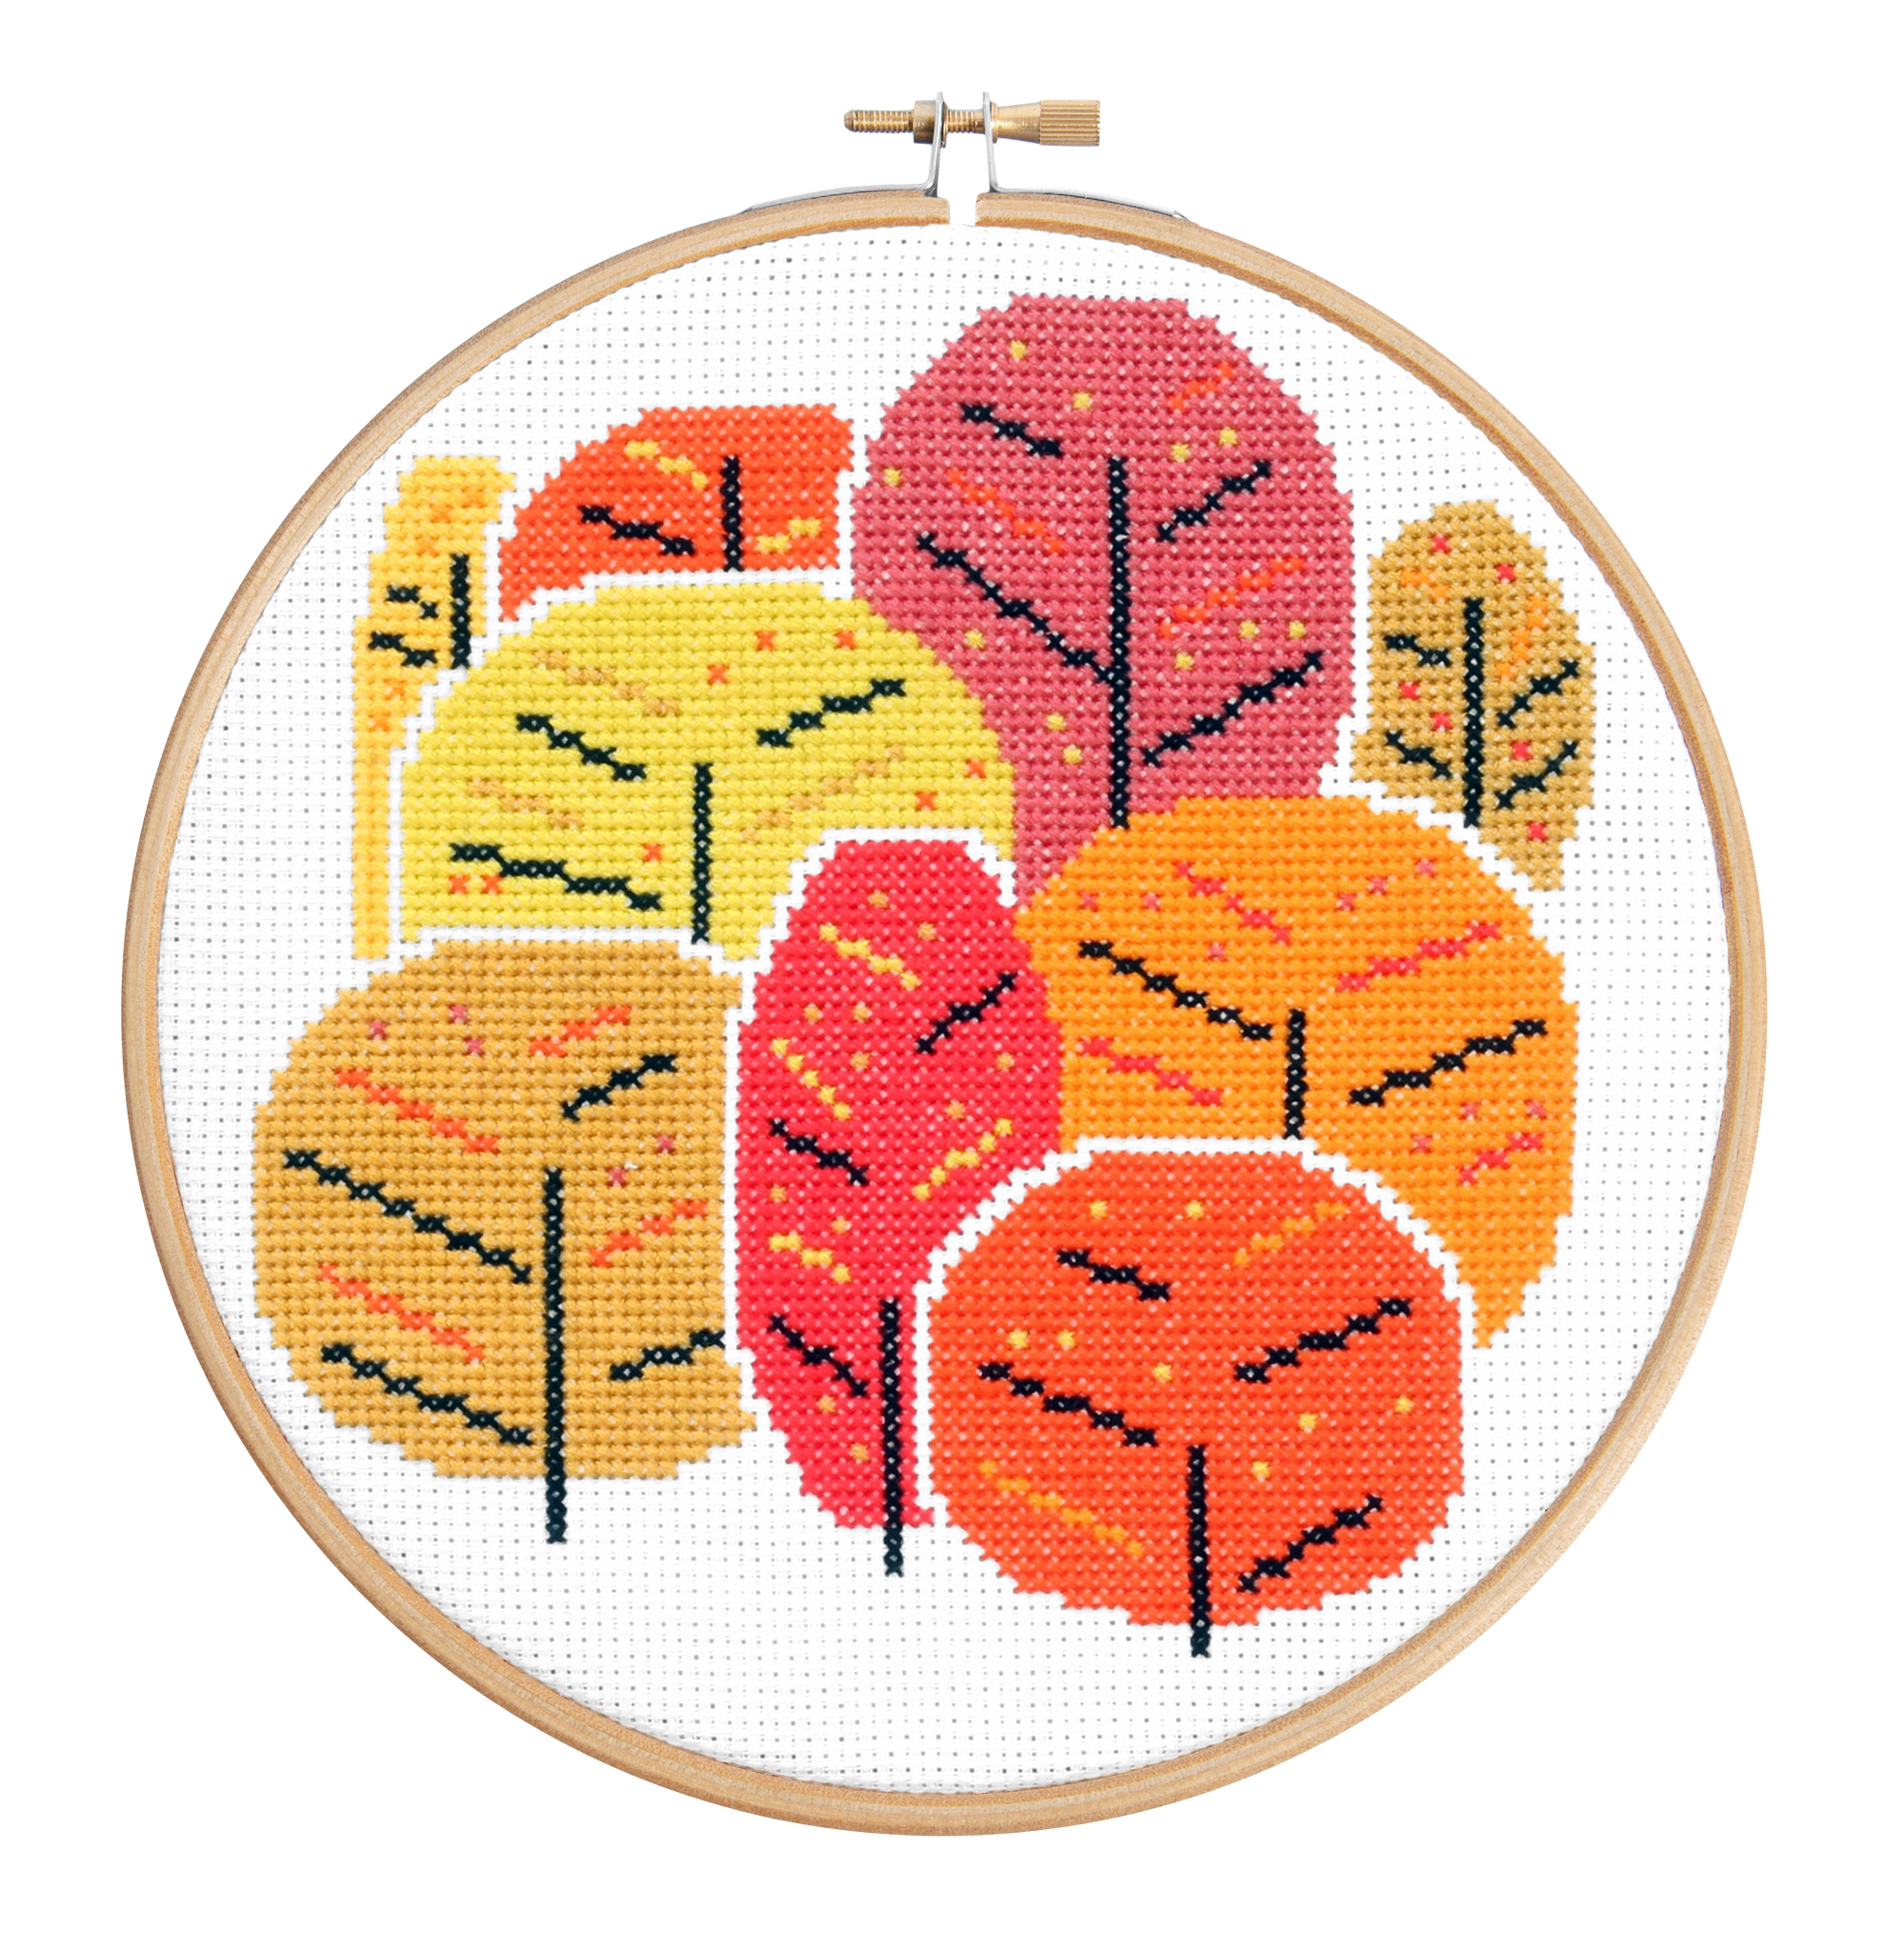 Summer Hoop Counted Cross Stitch Kit - Needlework Projects, Tools